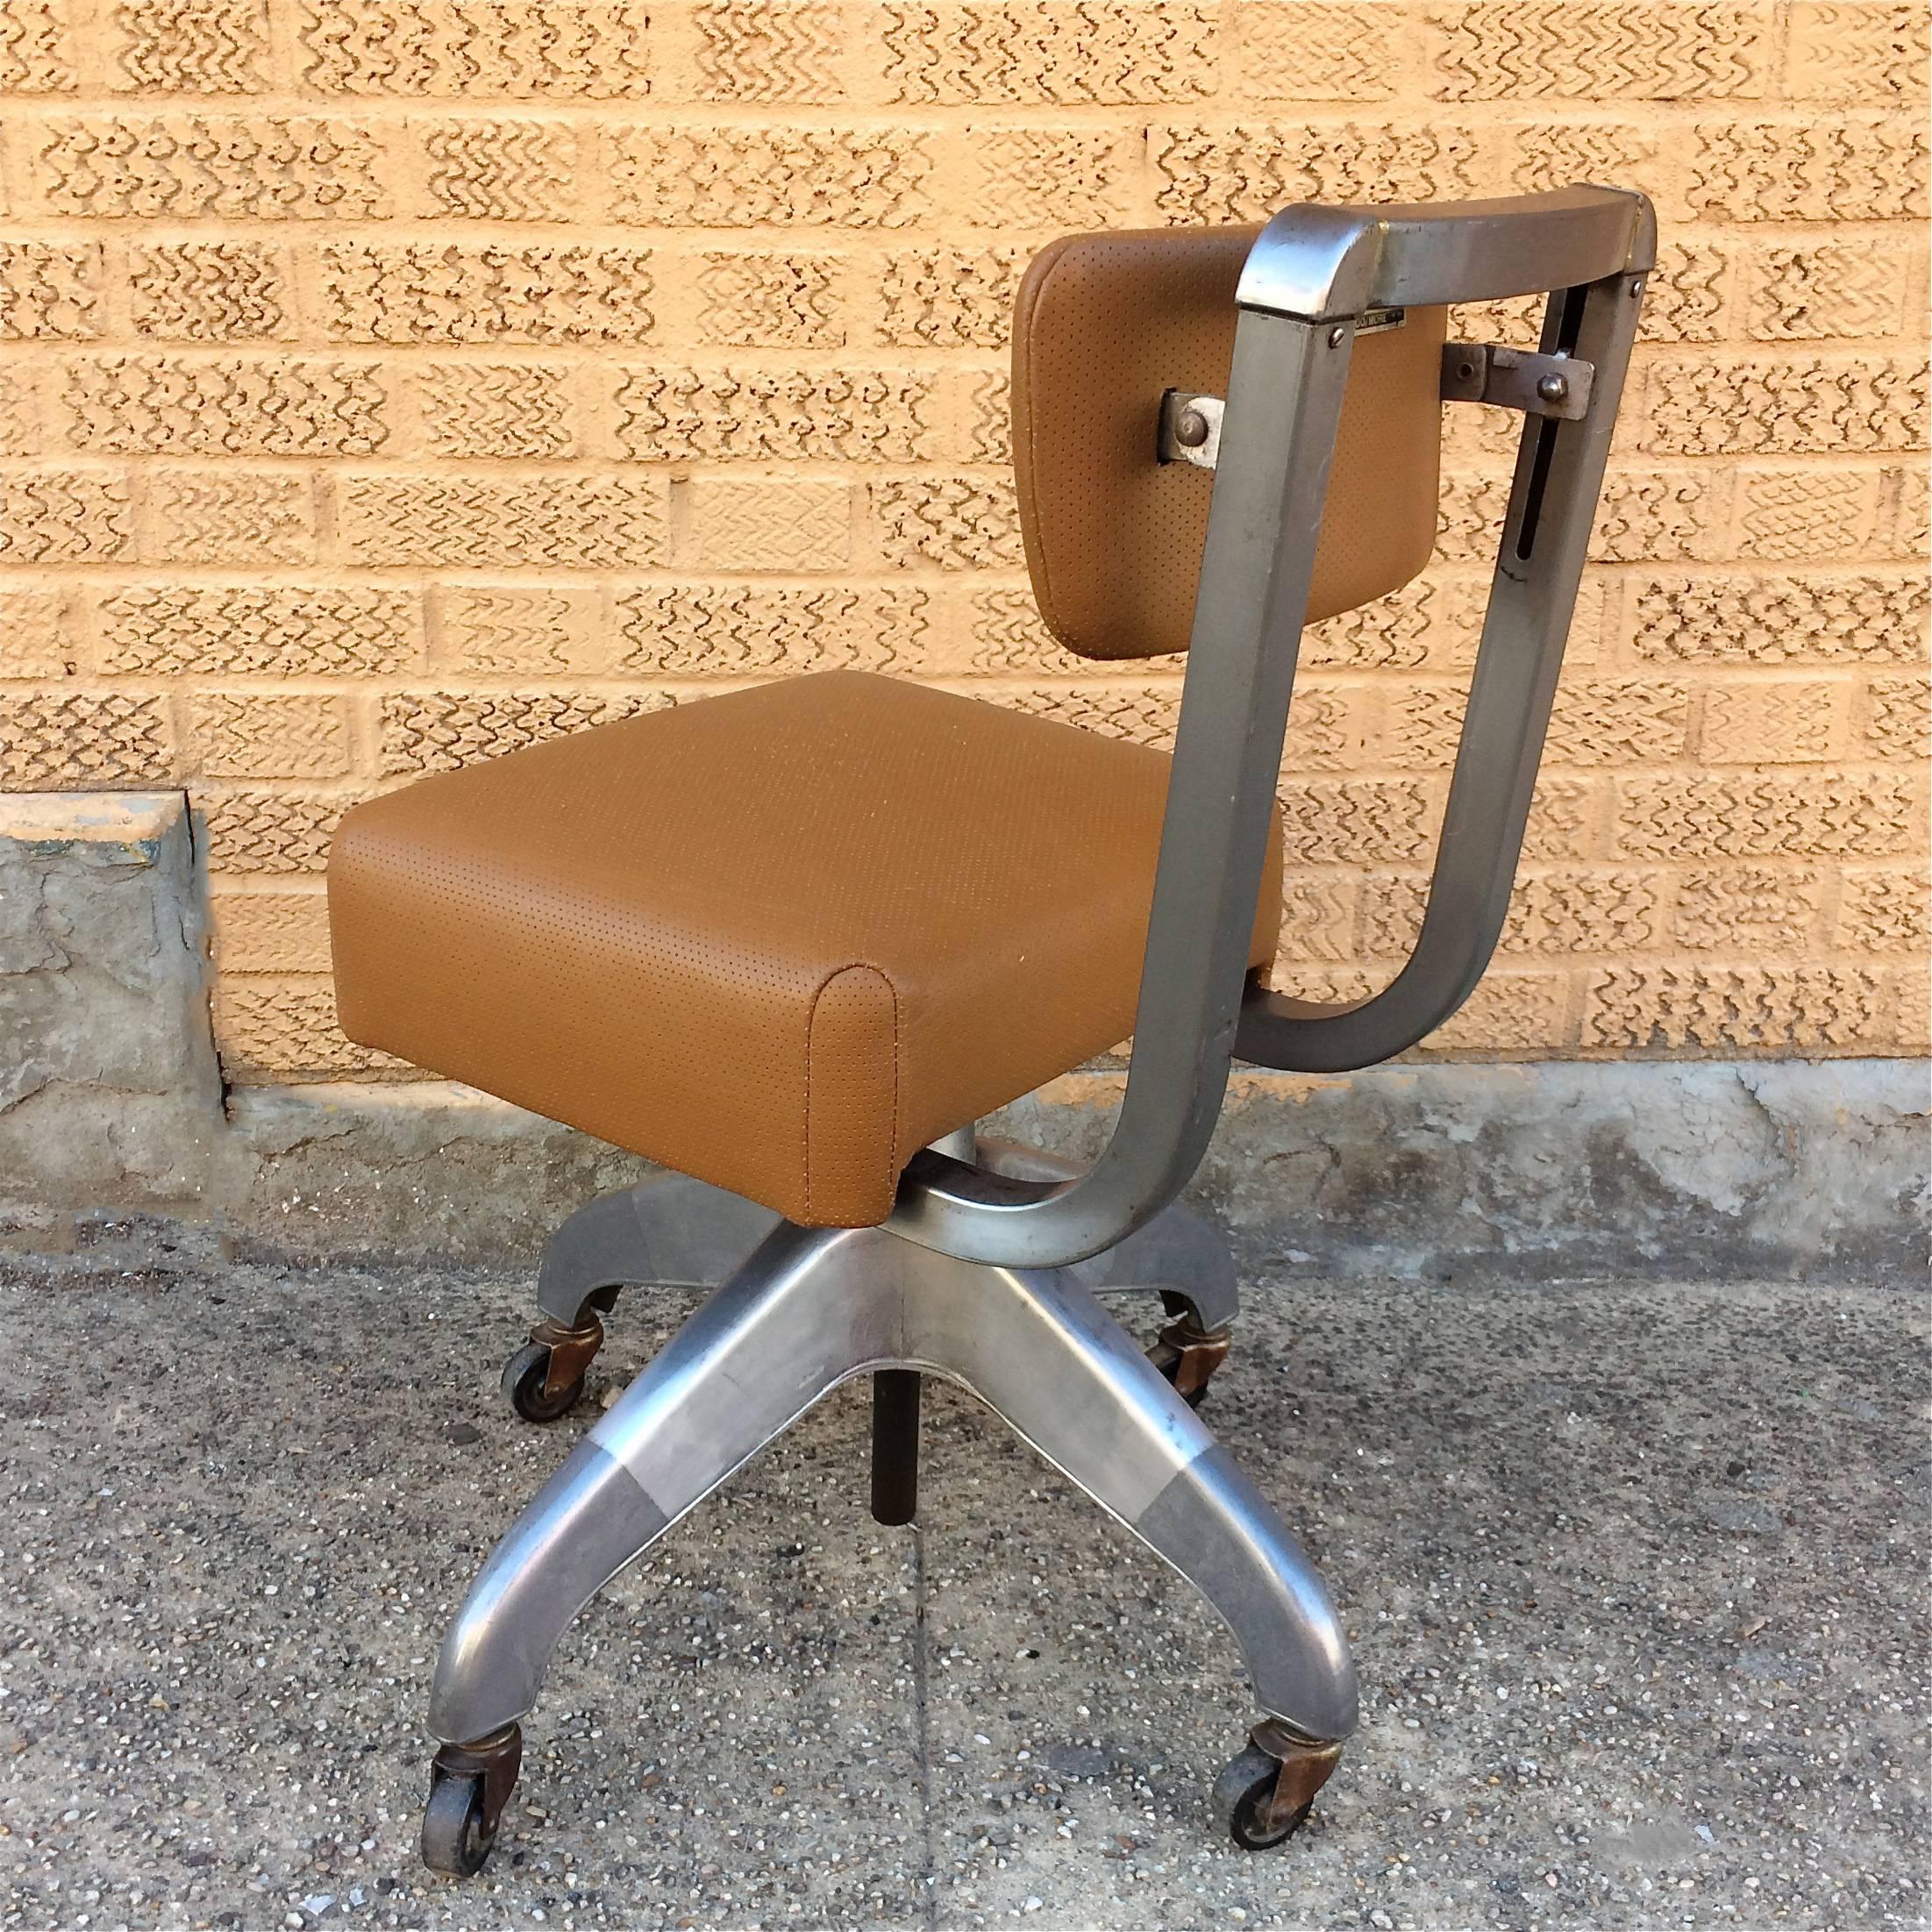 domore office chair